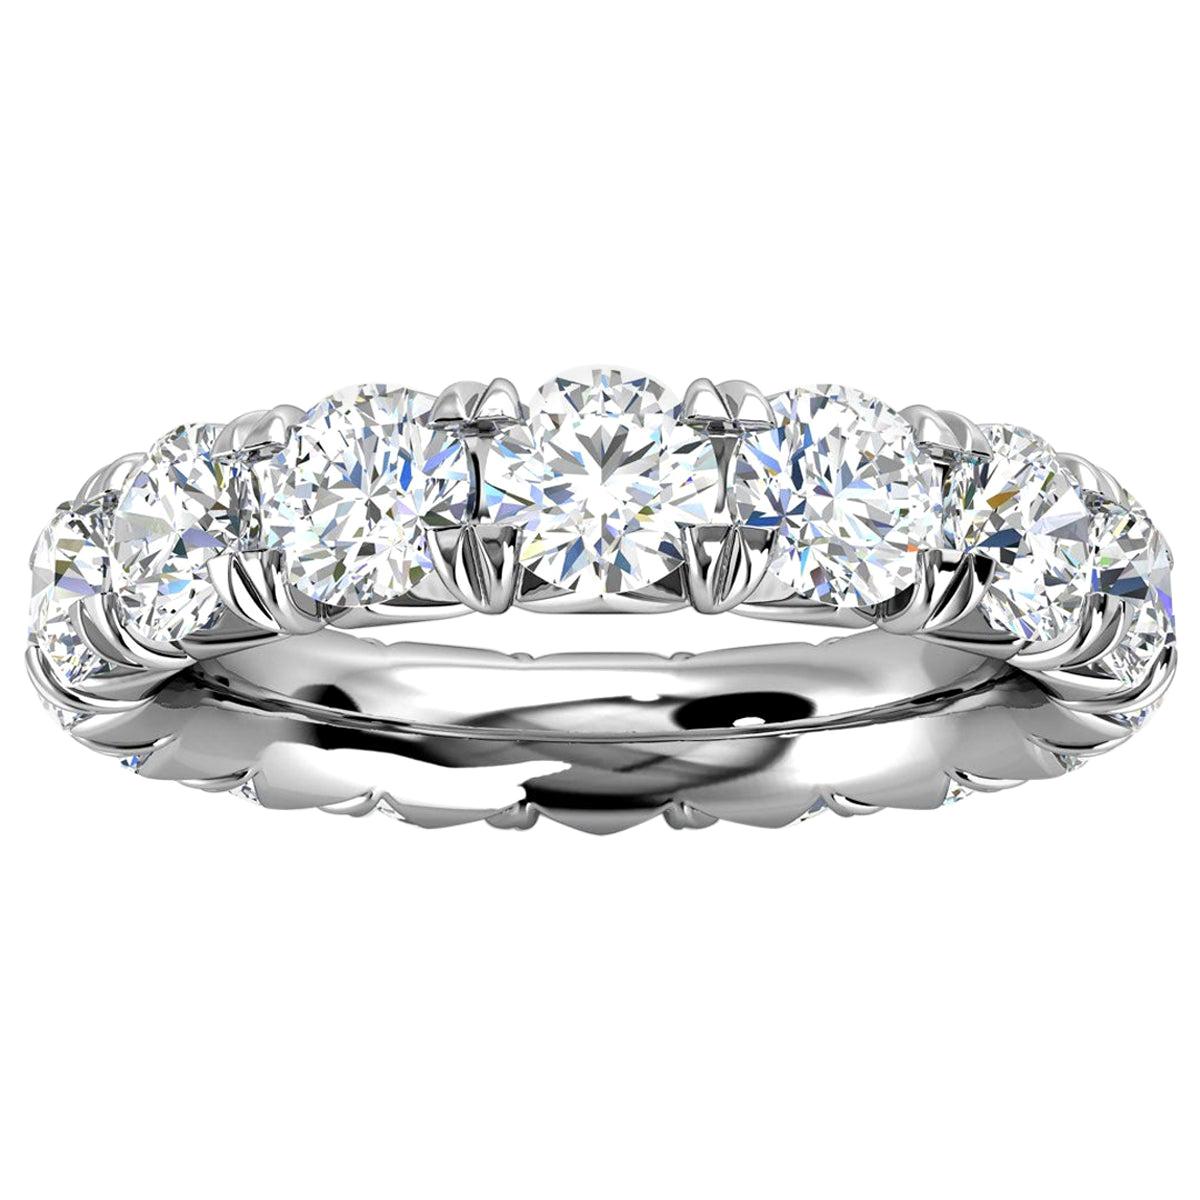 For Sale:  18k White Gold Mia French Pave Diamond Eternity Ring '4 Ct. tw'